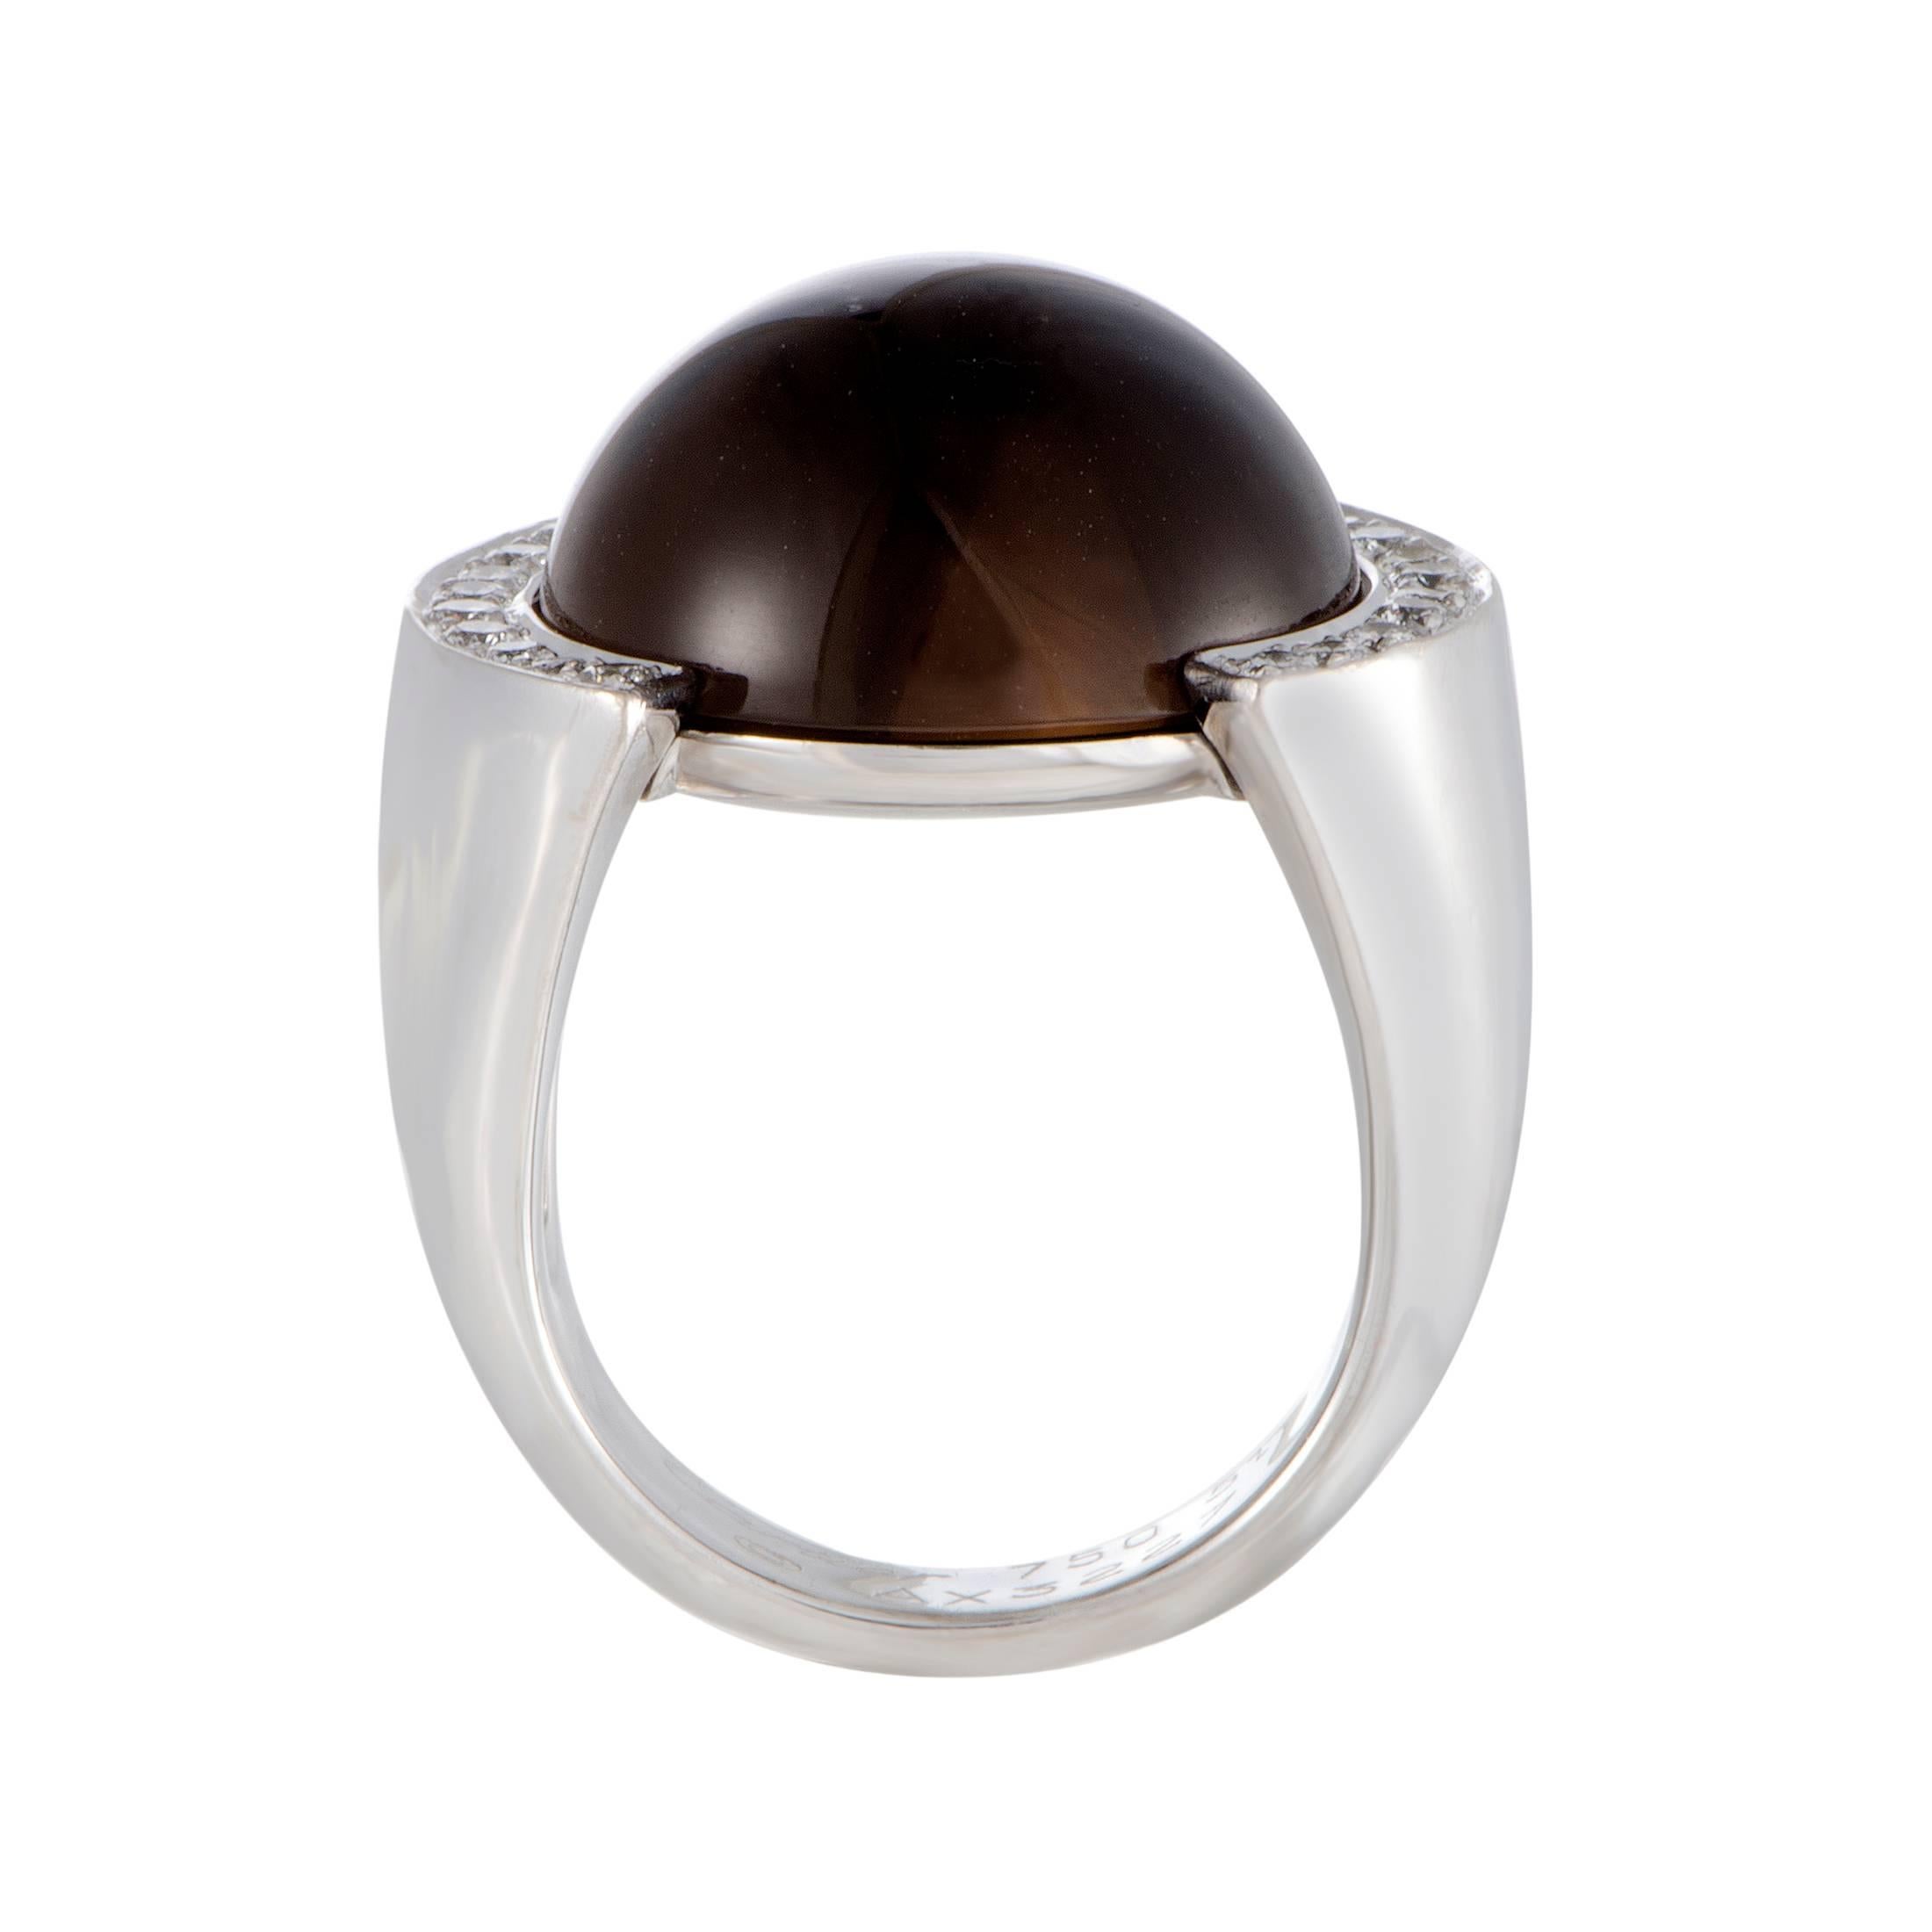 Perfectly contrasting the immaculate sheen of gracefully shaped 18K white gold and the marvelous smooth surface of delightful smoky quartz, the 0.50ct of diamonds produce a dazzling visual effect in this remarkable ring from Cartier.
Ring Size: